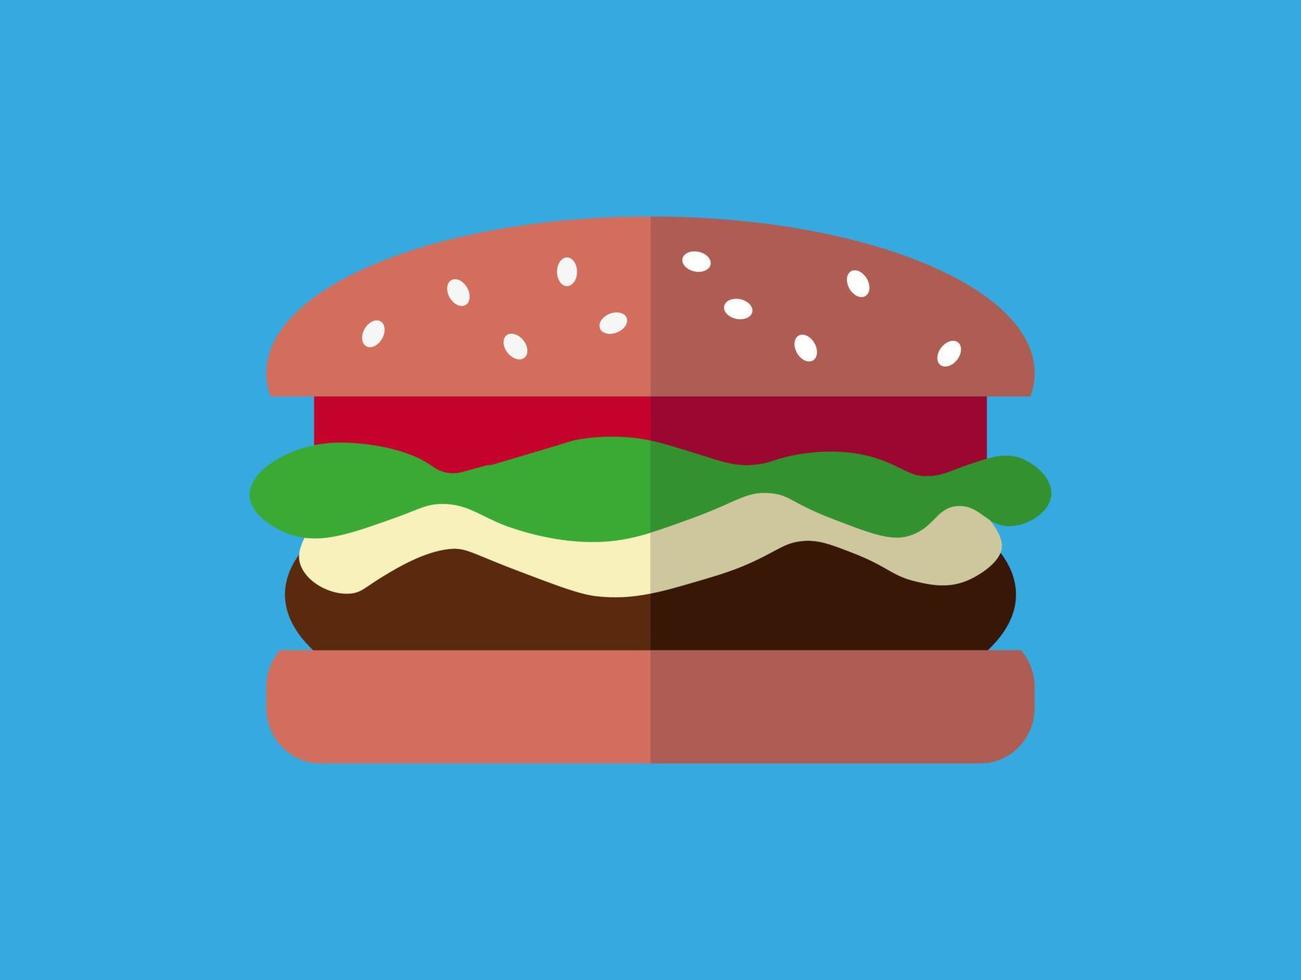 Hamburger vector illustration in flat desing style isolated on blue background